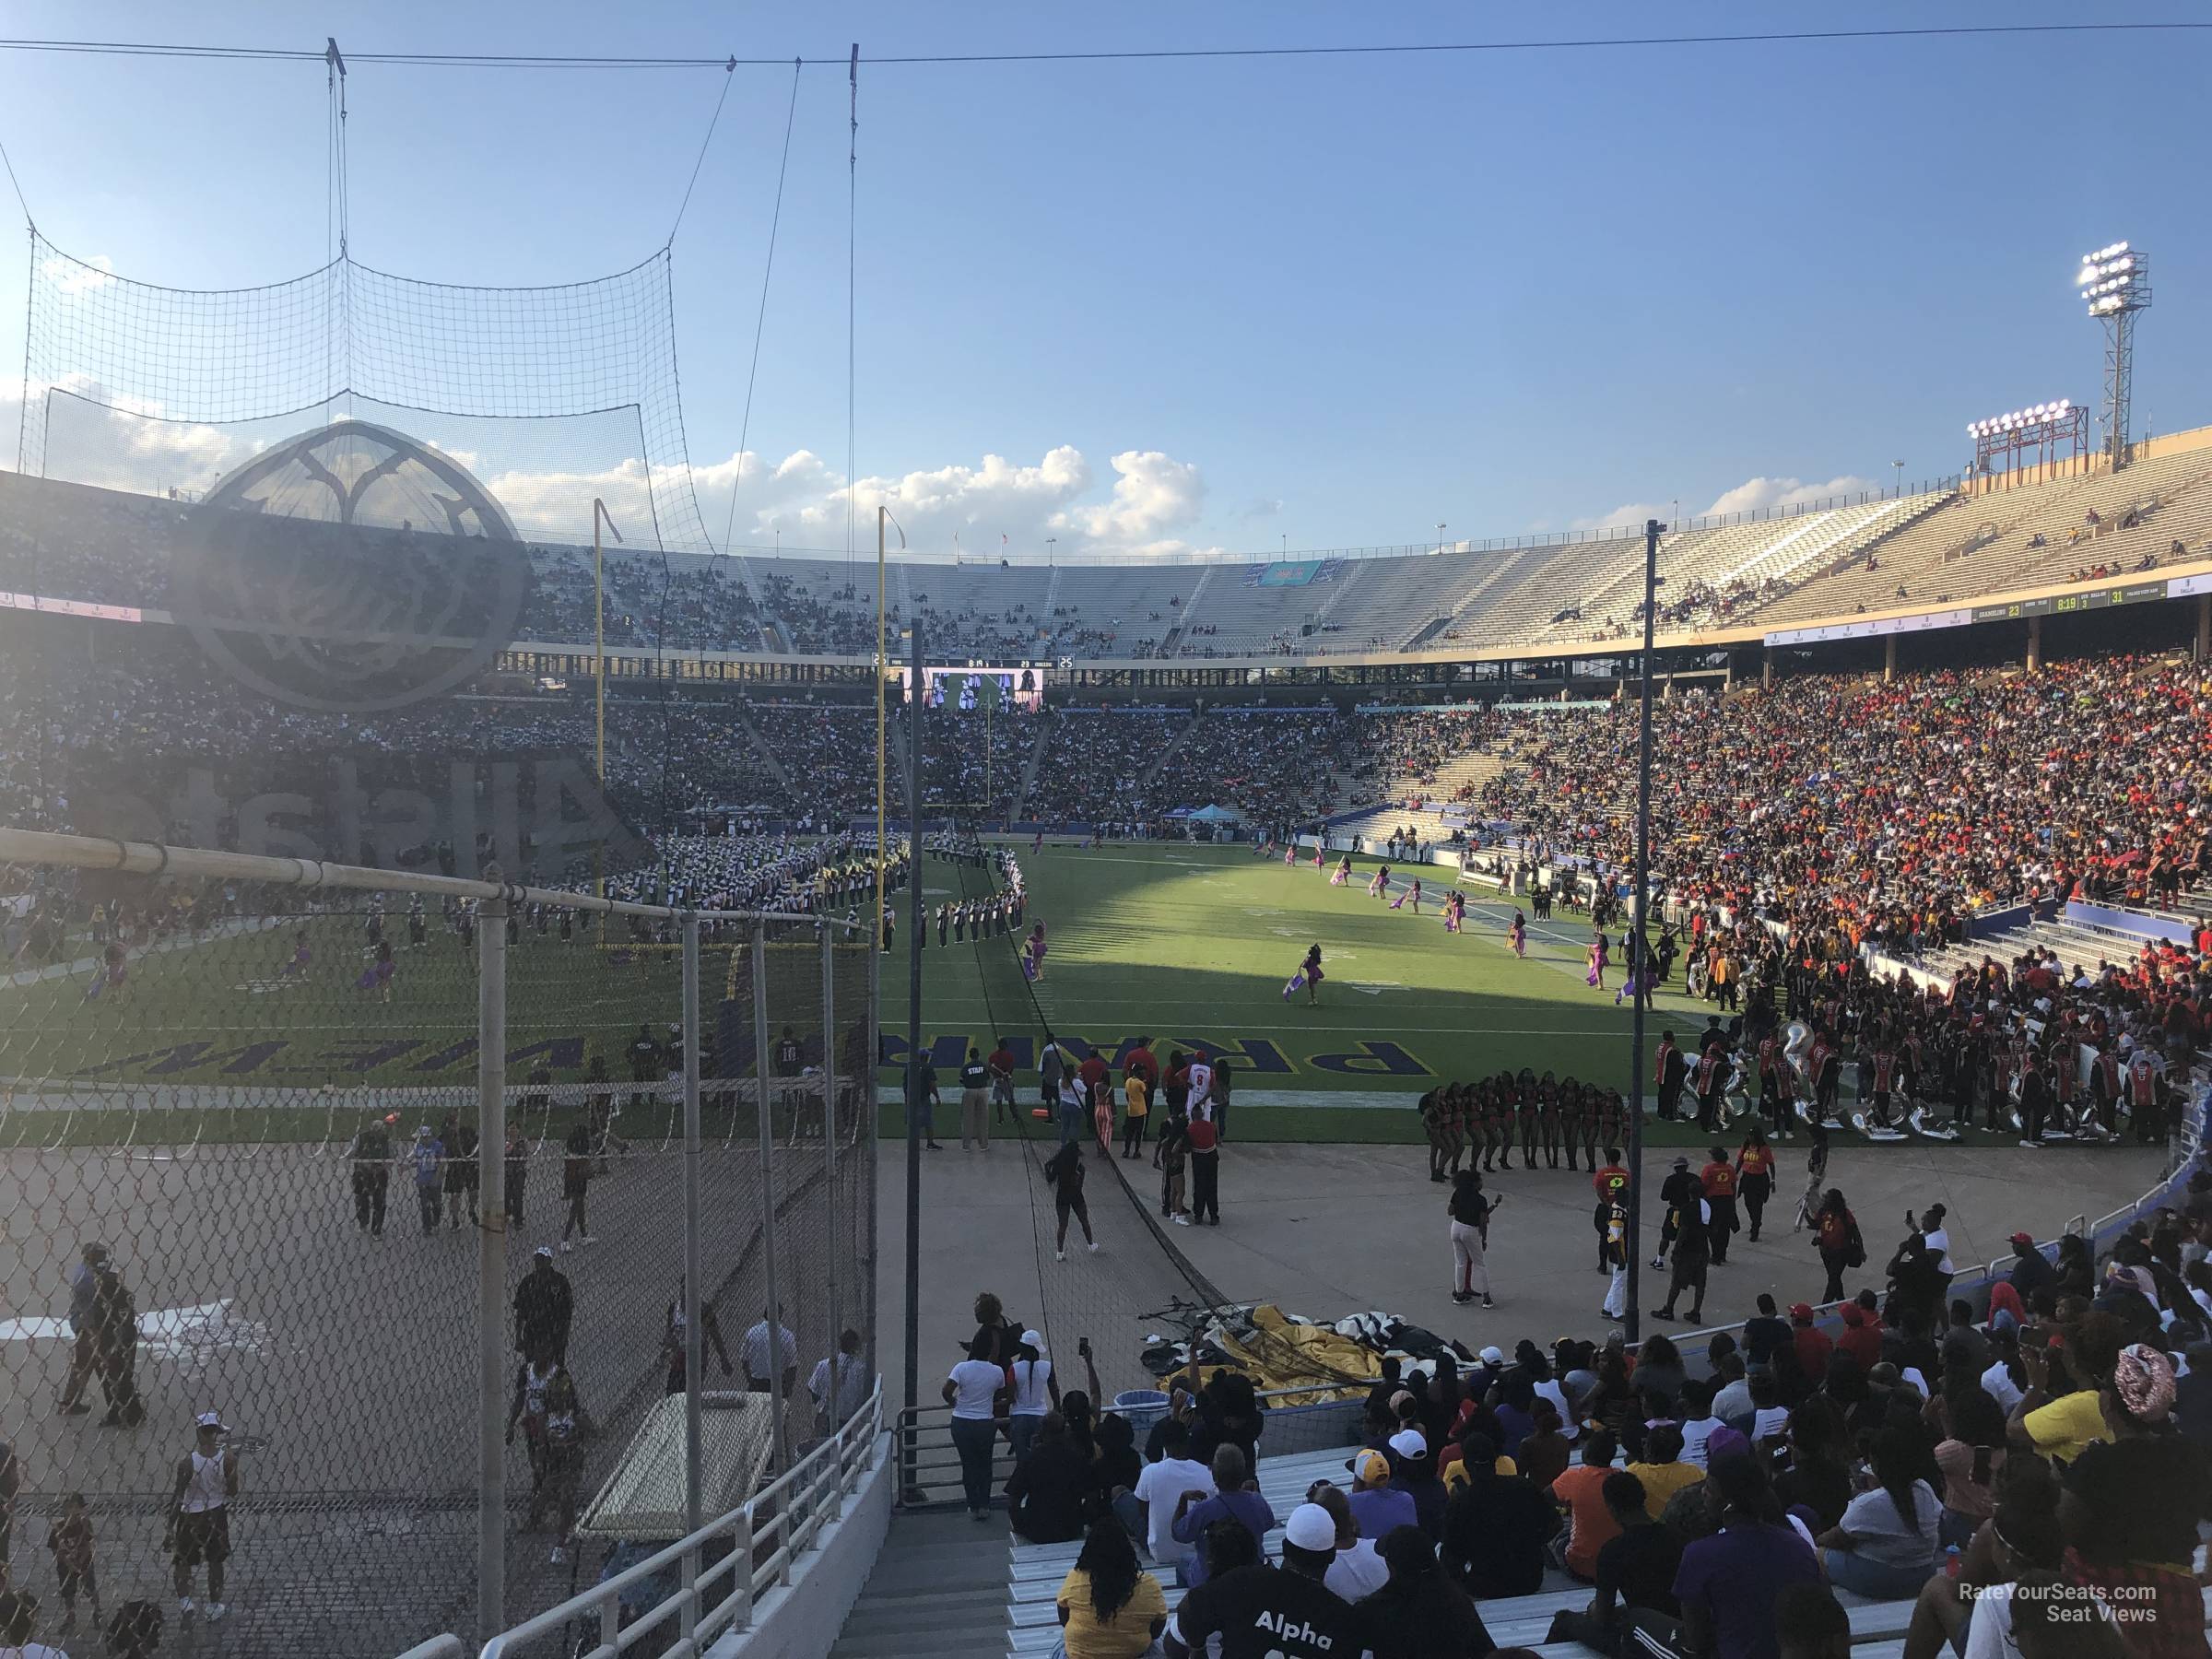 section 32, row 25 seat view  - cotton bowl